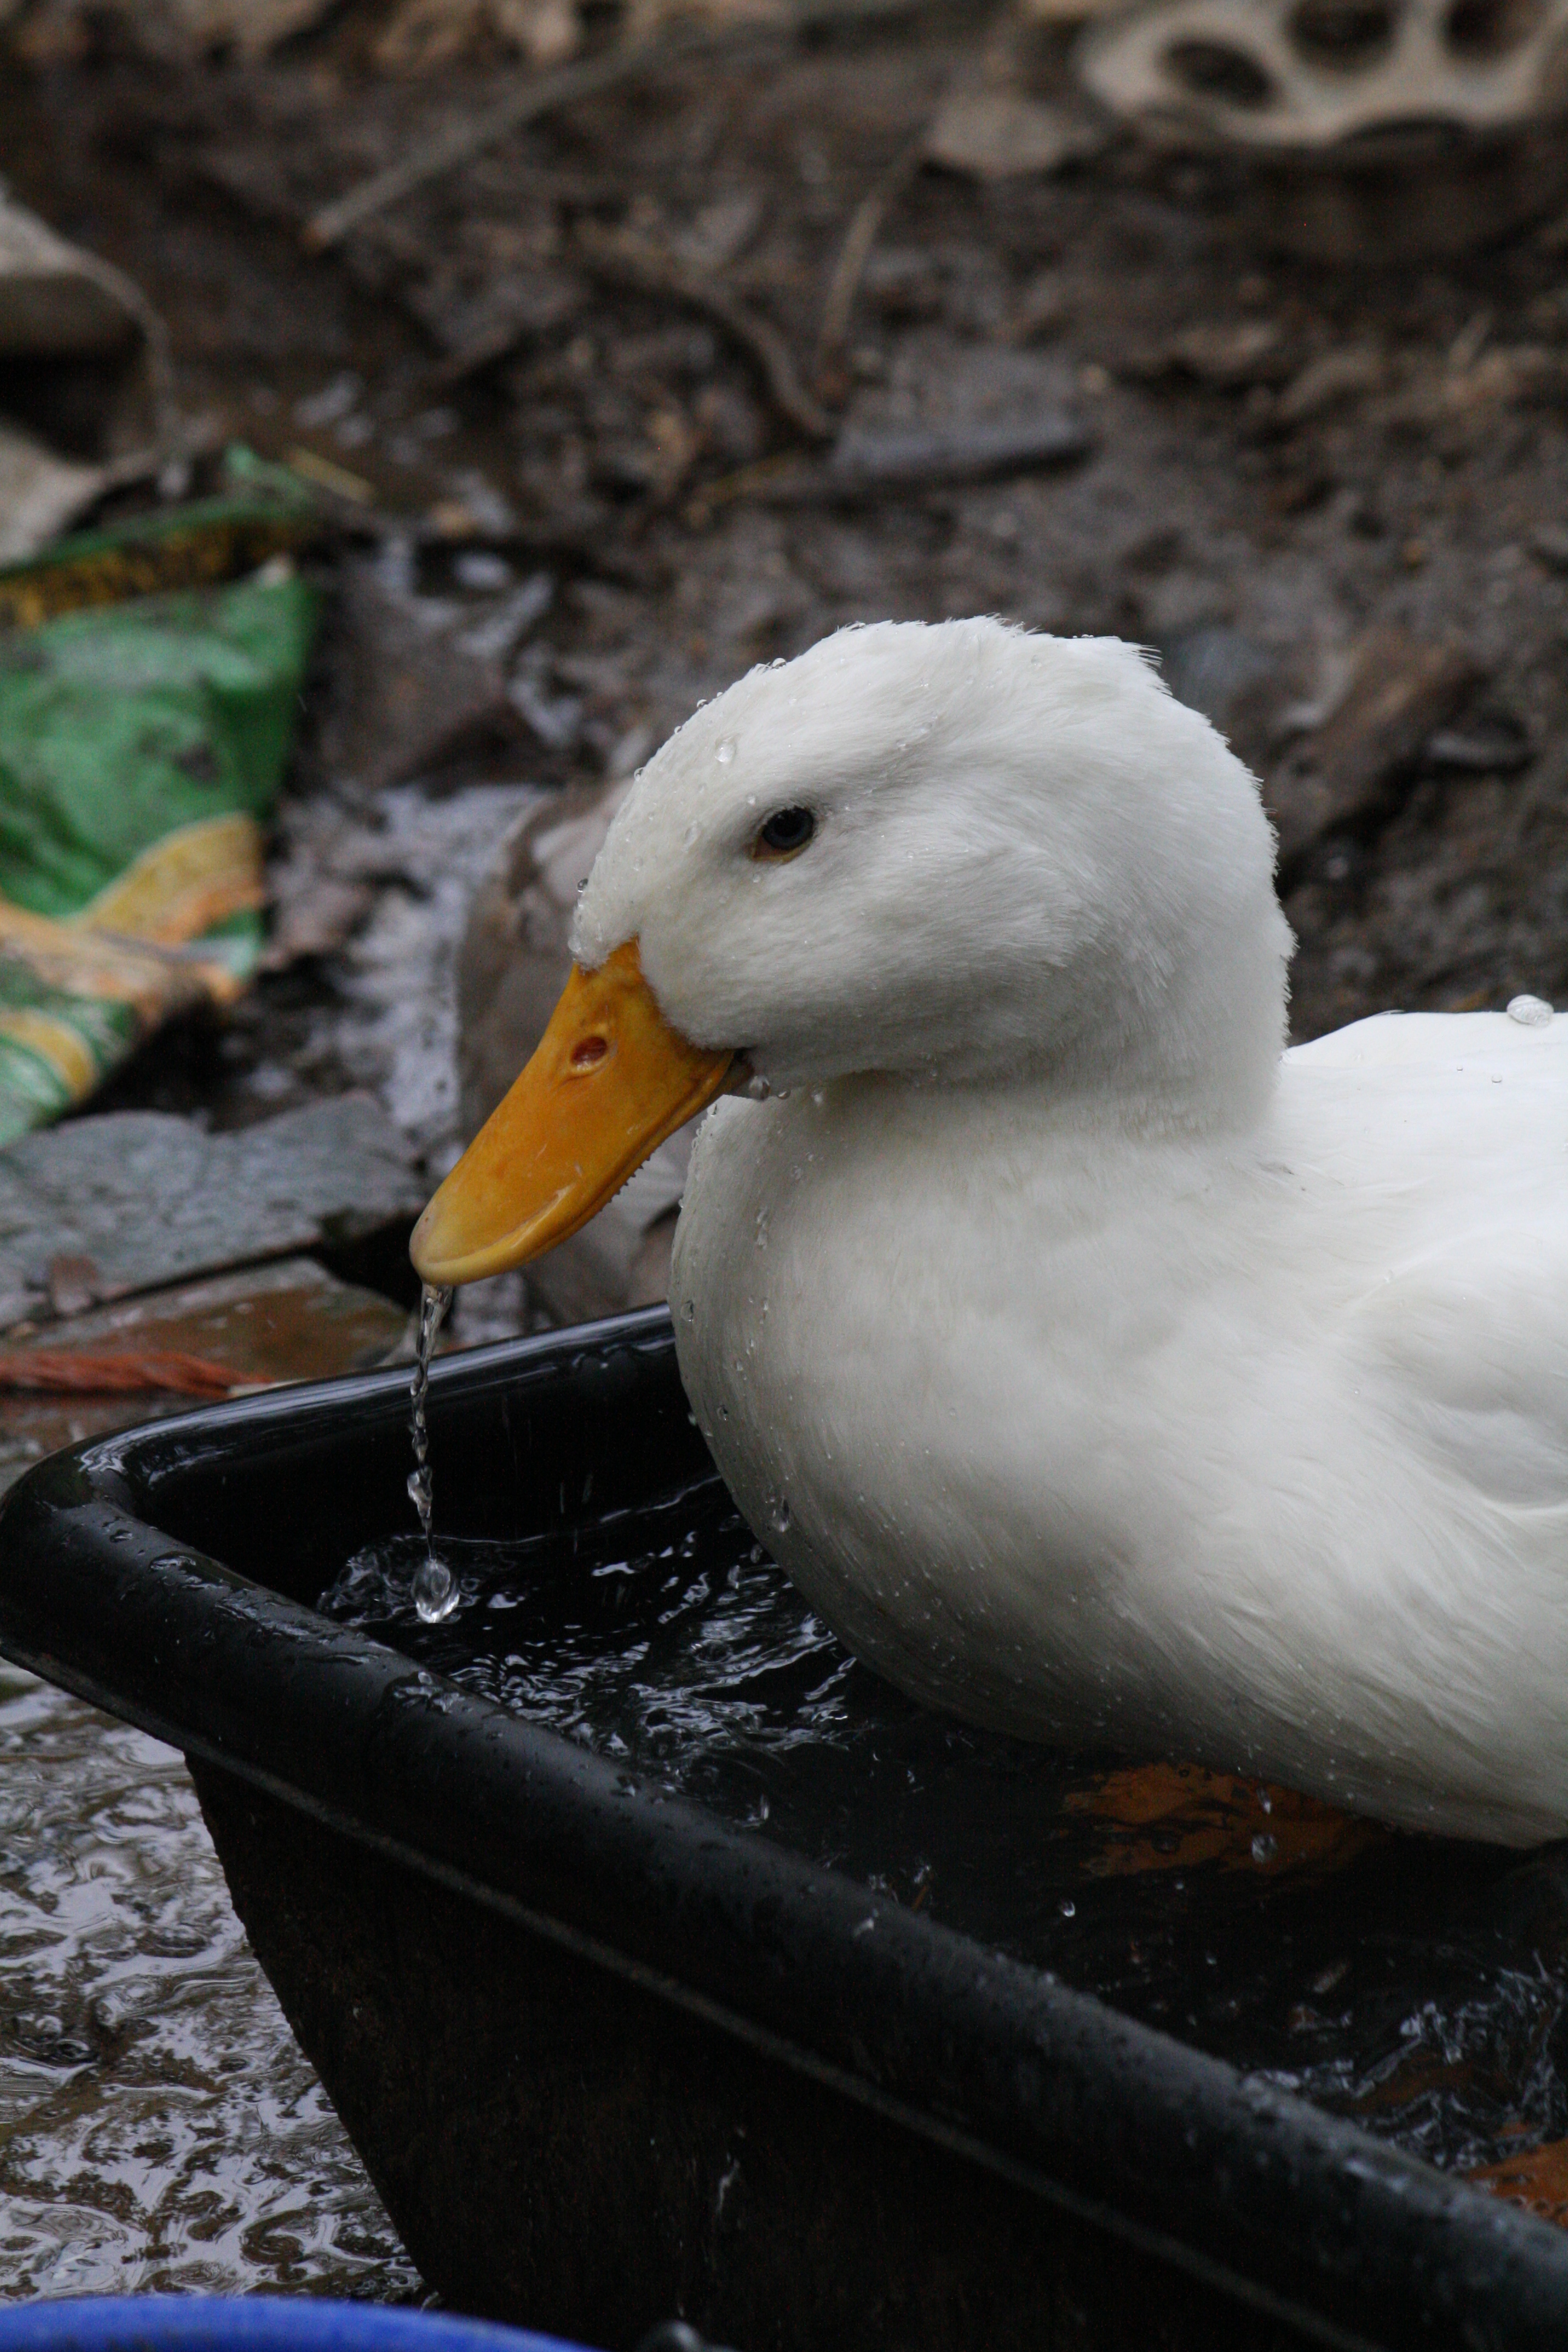 Puddles, the silliest, happiest Pekin duck I ever knew! RIP Puddles!